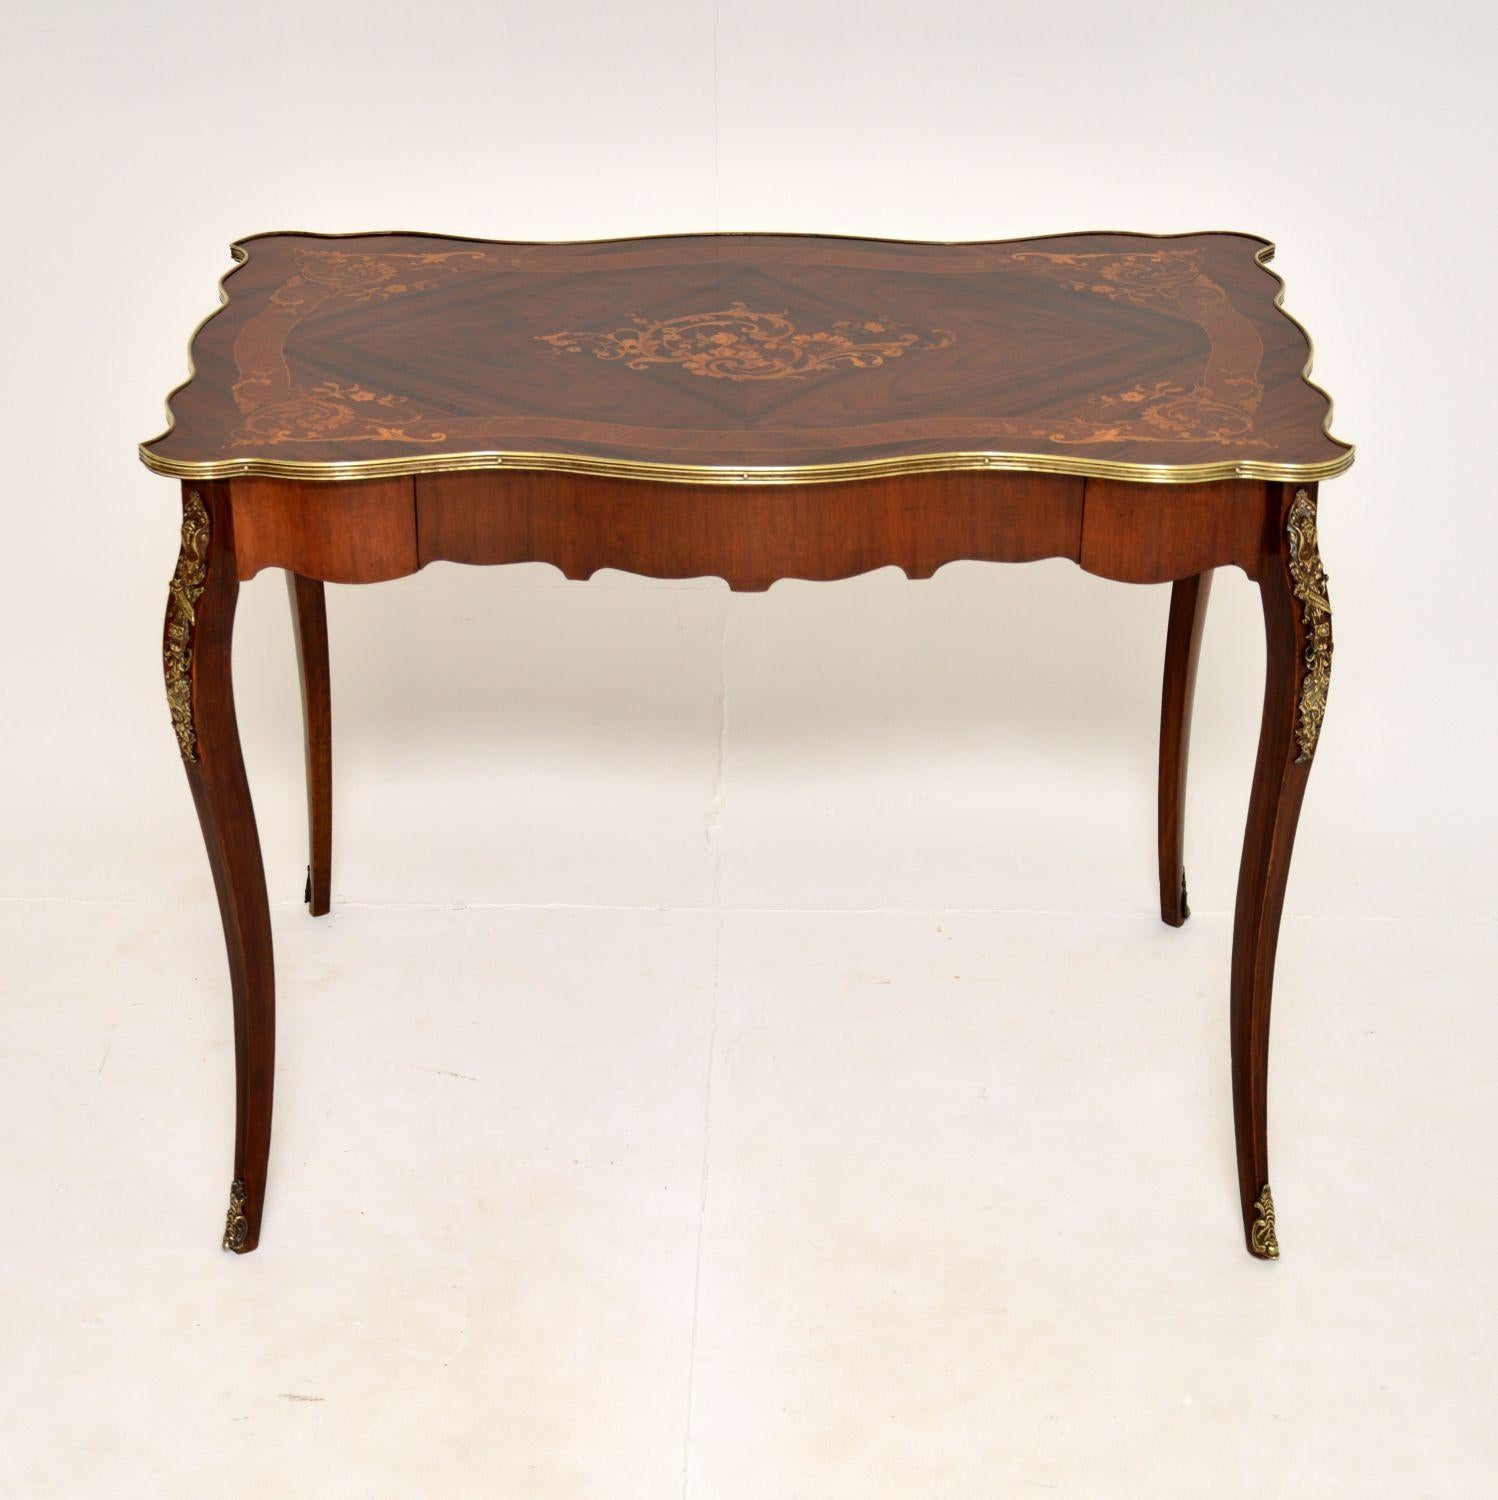 A beautiful and very elegant antique French writing table-desk made from various woods. This was made in France, it dates from around the 1880-1900 period.

It is really well made and has a gorgeous, shapely design. It is finished on all sides, so